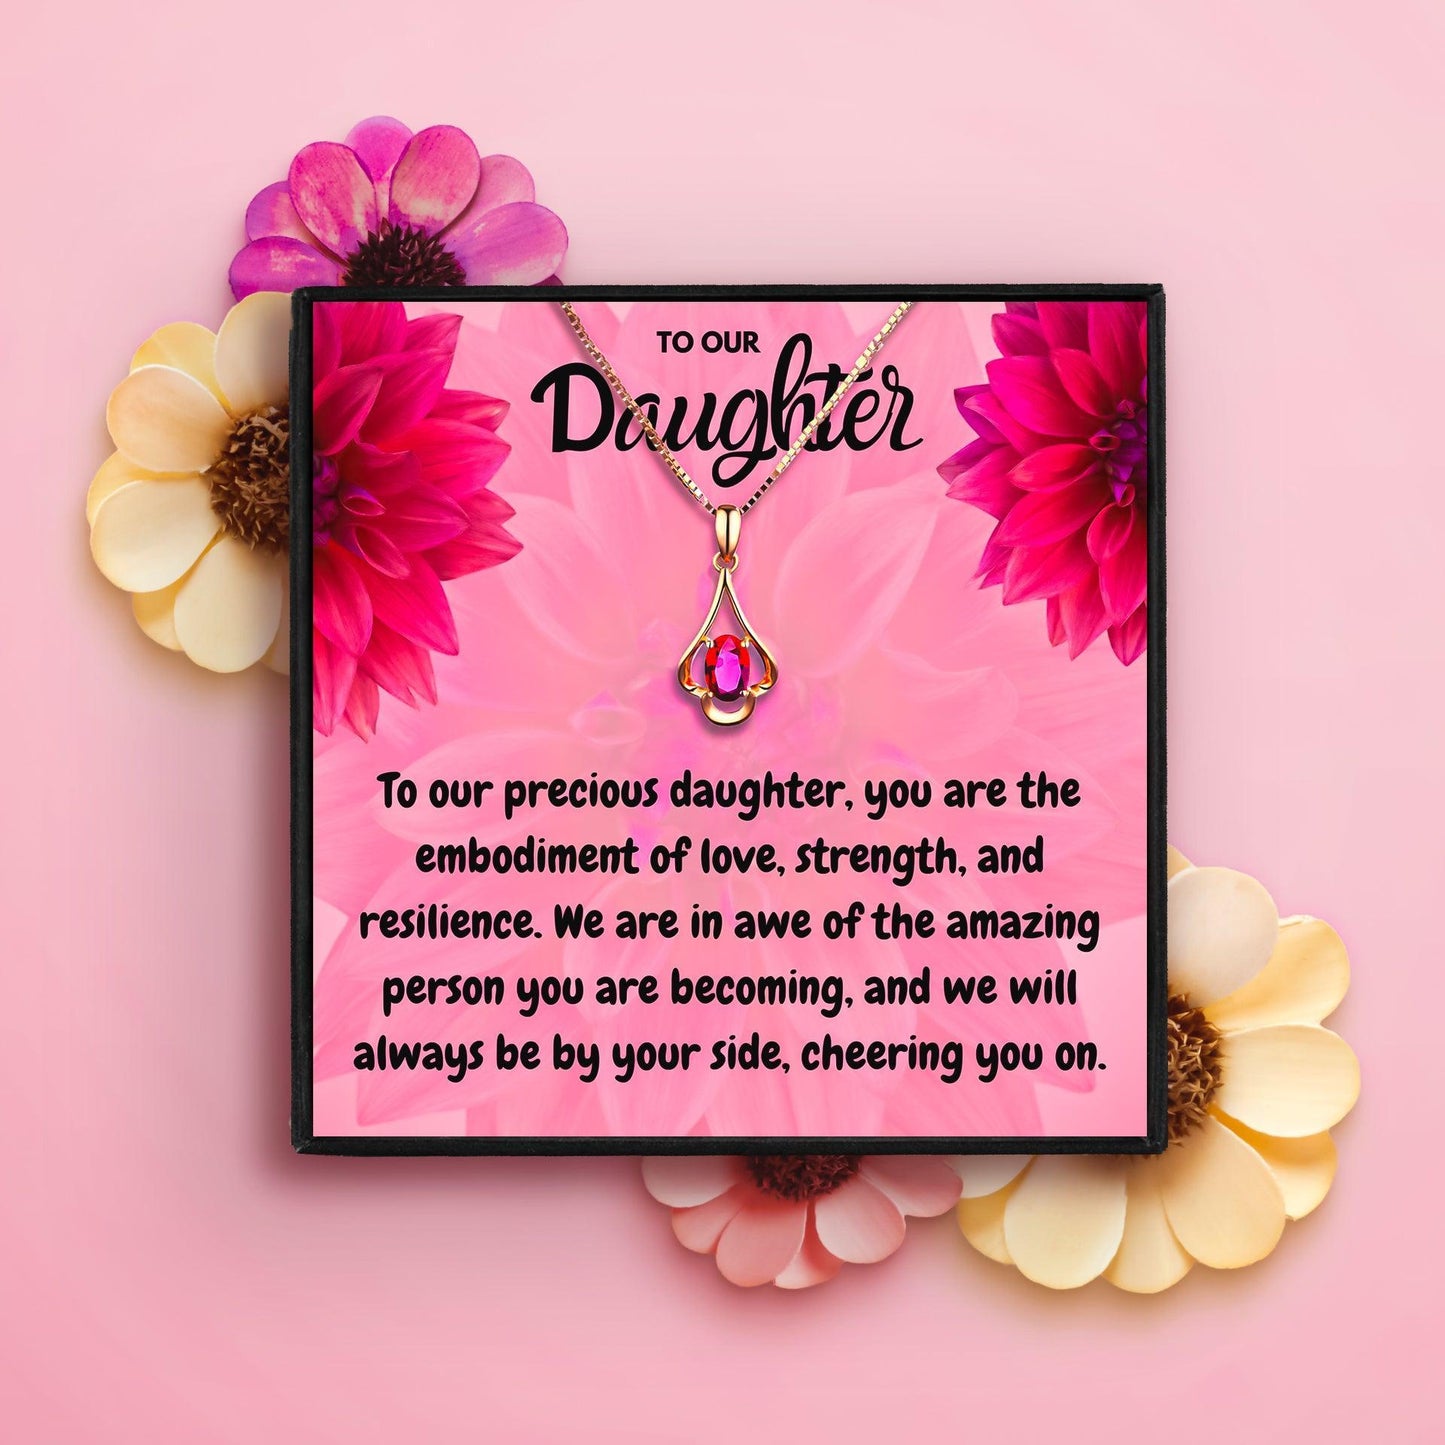 To Our Daughter Necklace Gift Set in 2023 | To Our Daughter Necklace Gift Set - undefined | For My Daughter necklace, Meaningful Daughter Necklaces, Mother Daughter Necklace, To my daughter necklace, To Our Daughter necklace | From Hunny Life | hunnylife.com